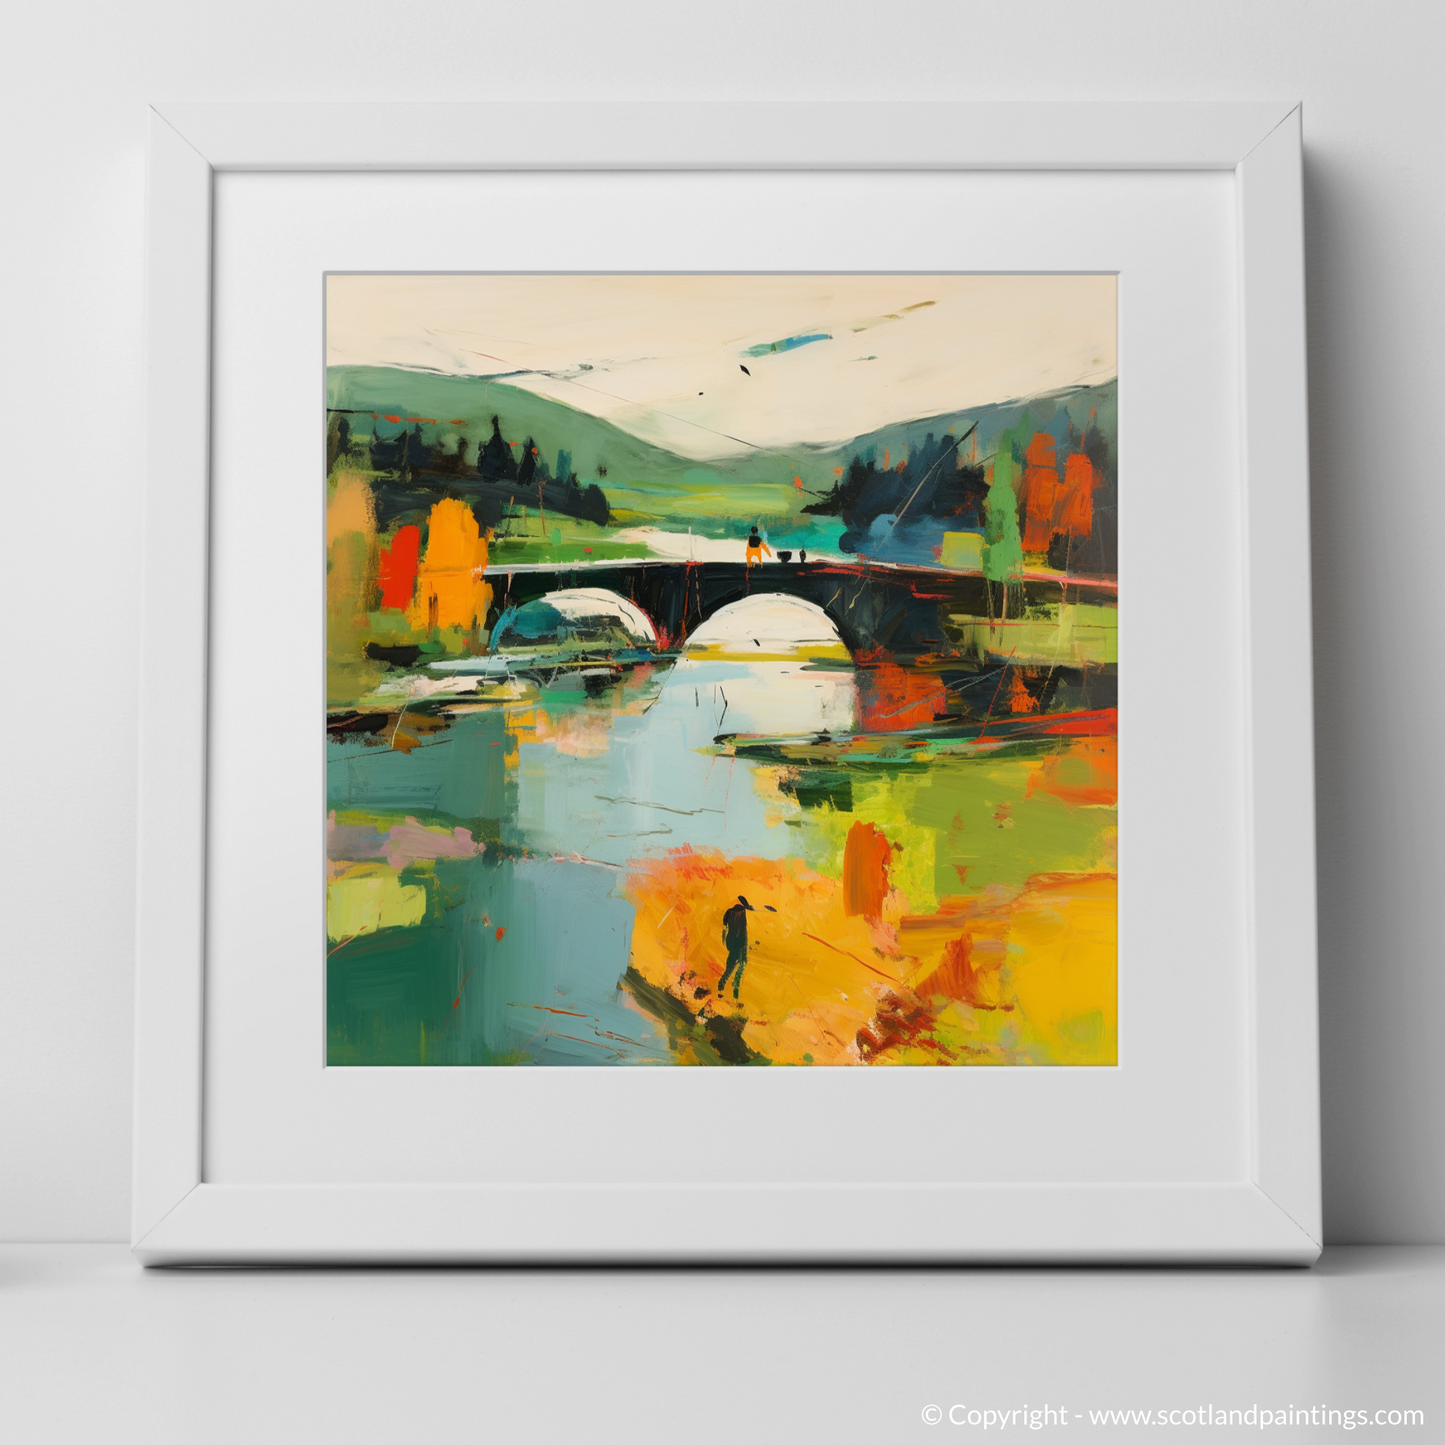 Abstract Serenity: Fly Fishing at Loch Achray with the Historic Bridge